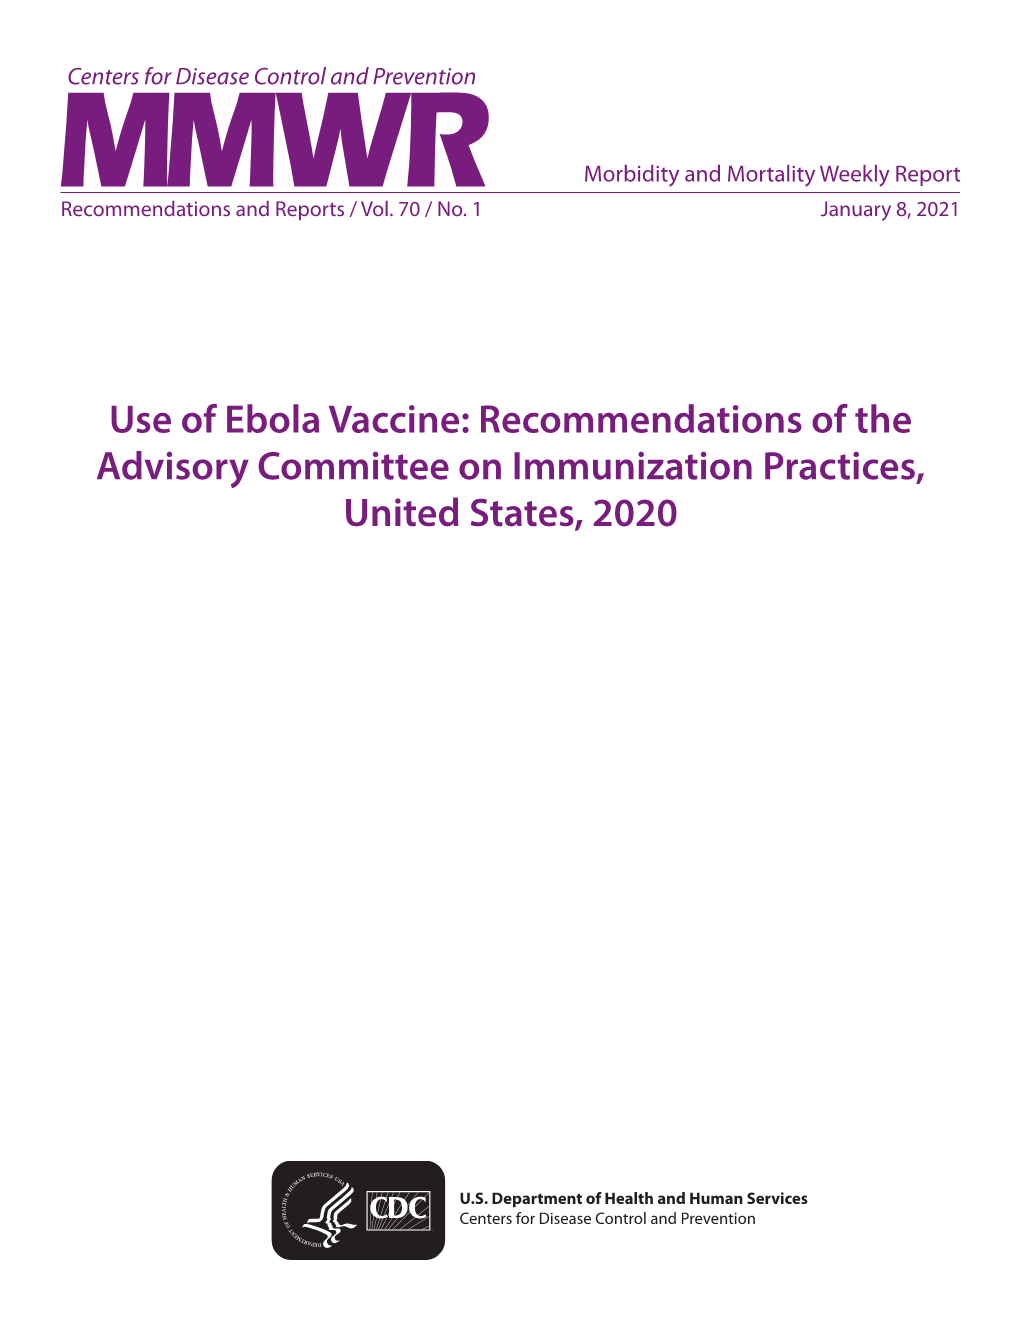 Use of Ebola Vaccine: Recommendations of the Advisory Committee on Immunization Practices, United States, 2020